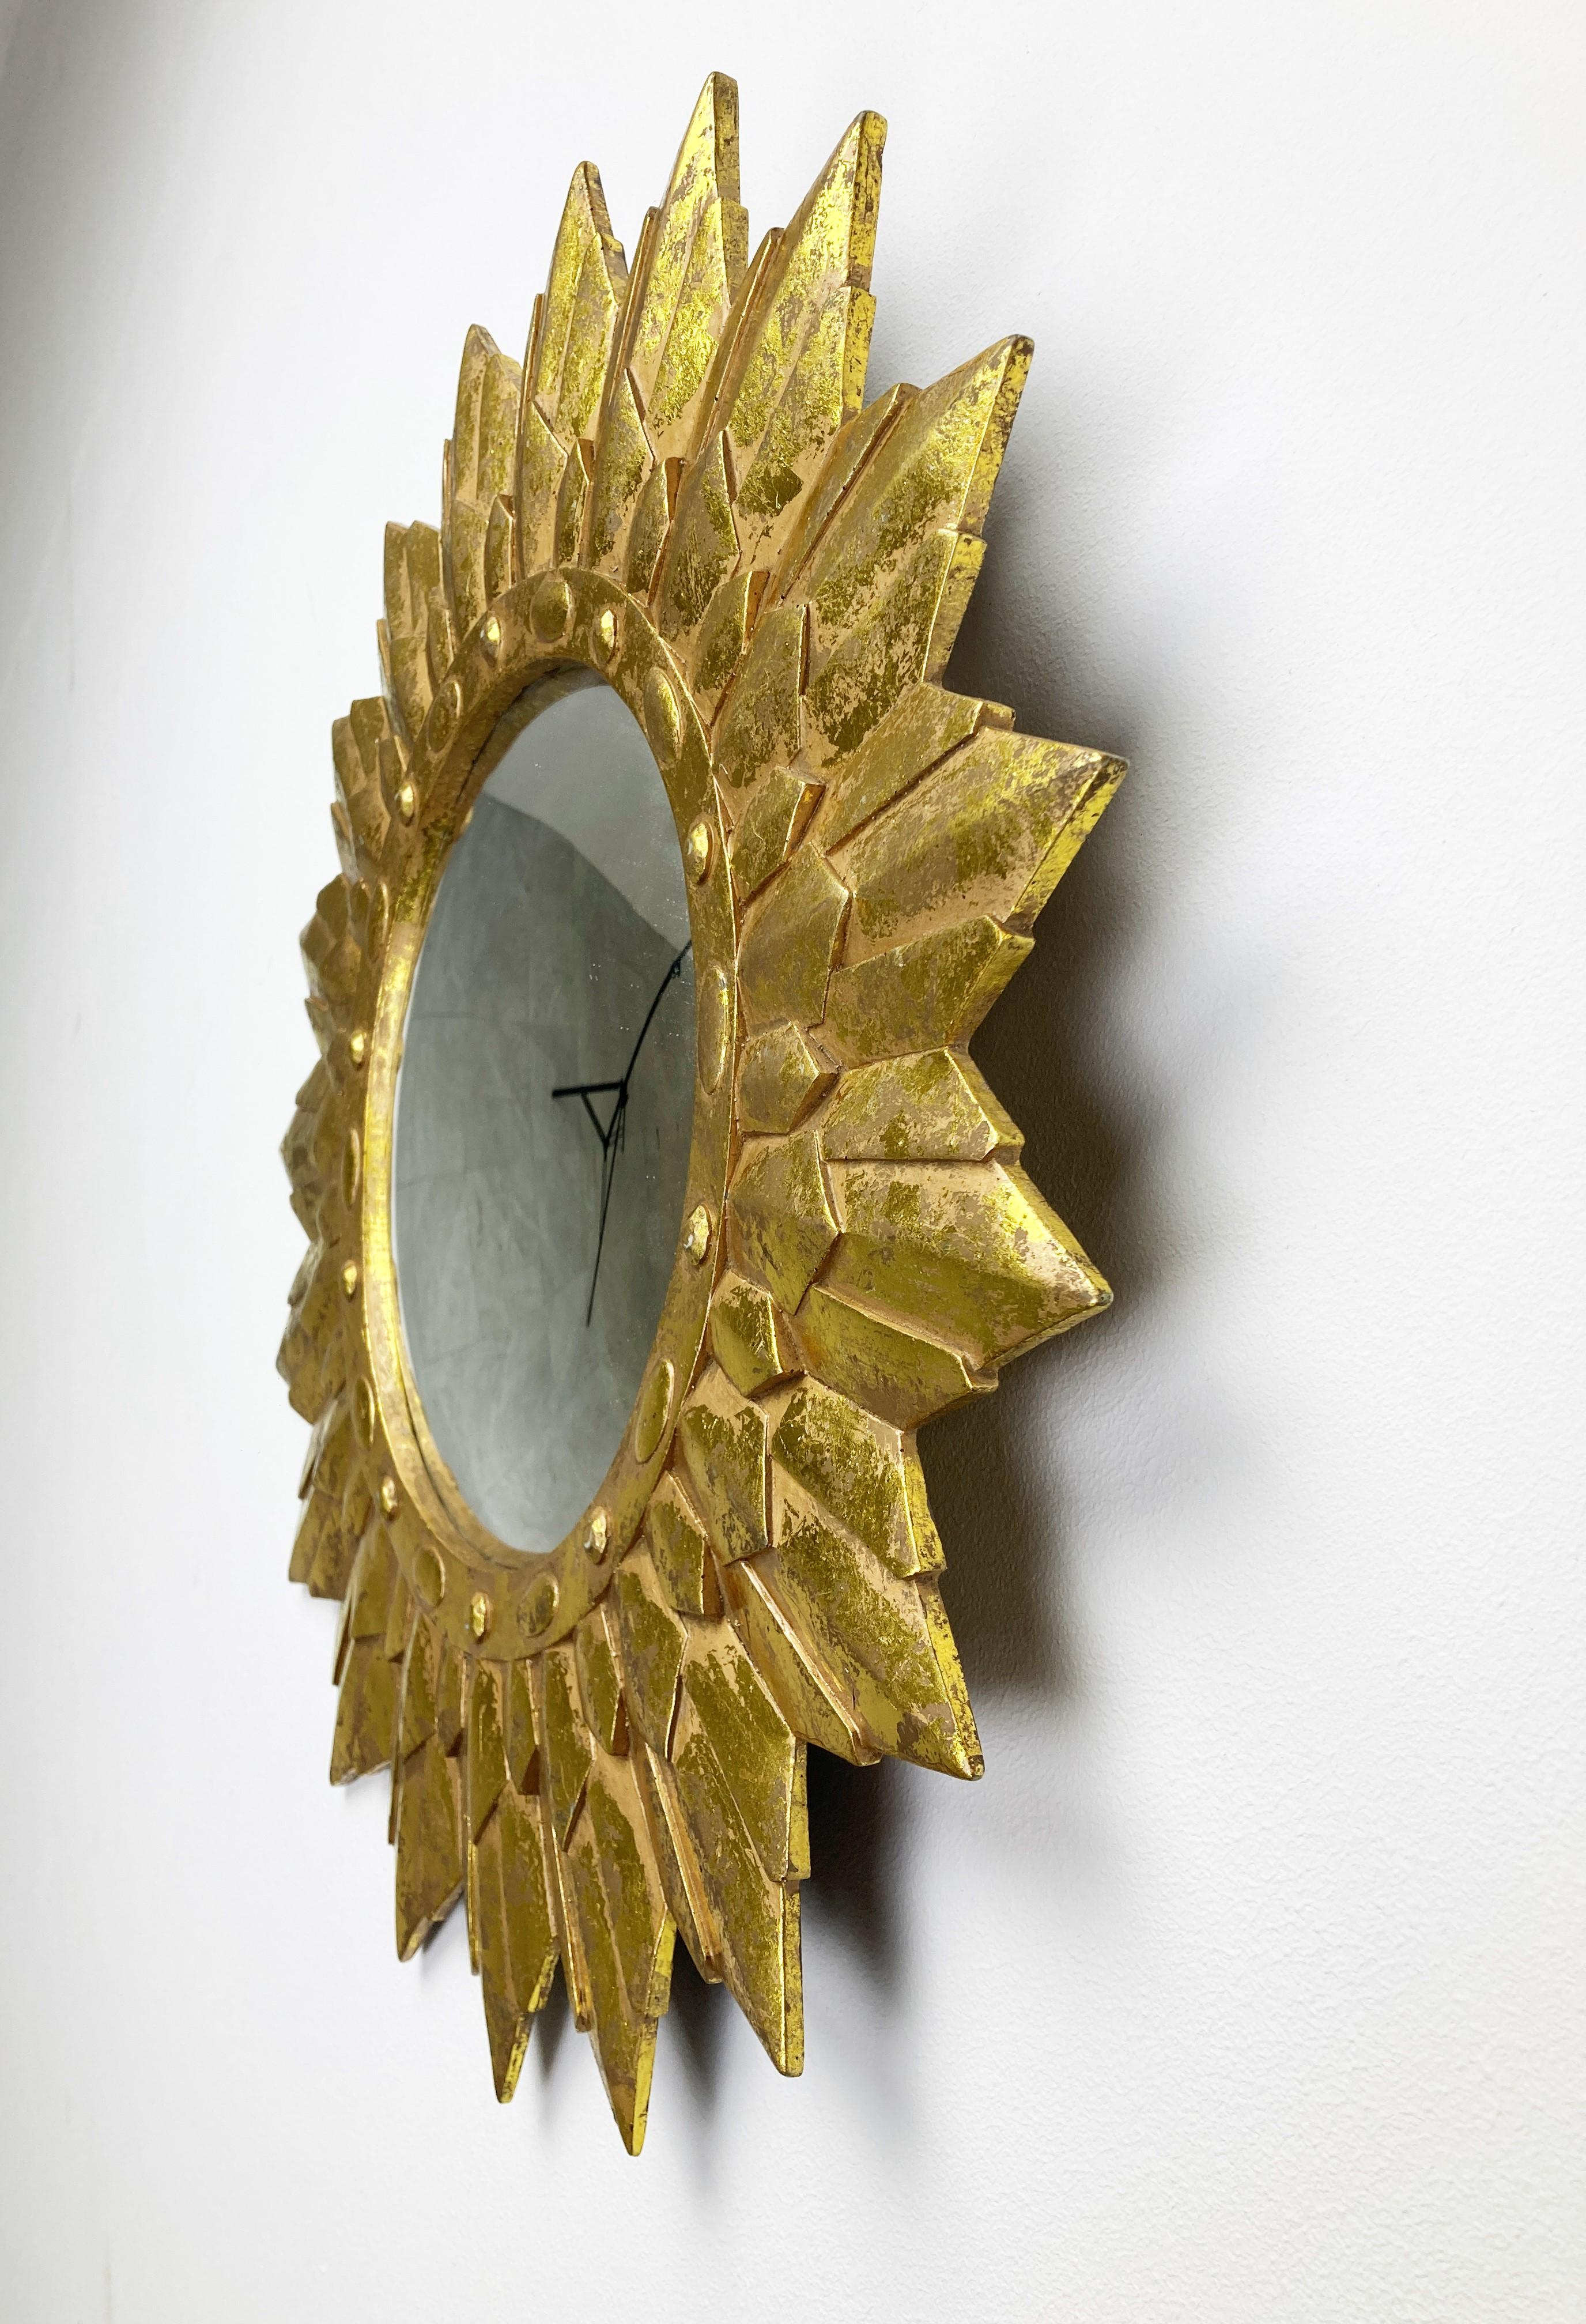 Gilded resin sunburst mirror with convex mirror glass.

The golden mirror is in a very good condition, beautifully patinated.

1960s - made in Belgium.

Dimensions:
Diameter: 50cm/19.68